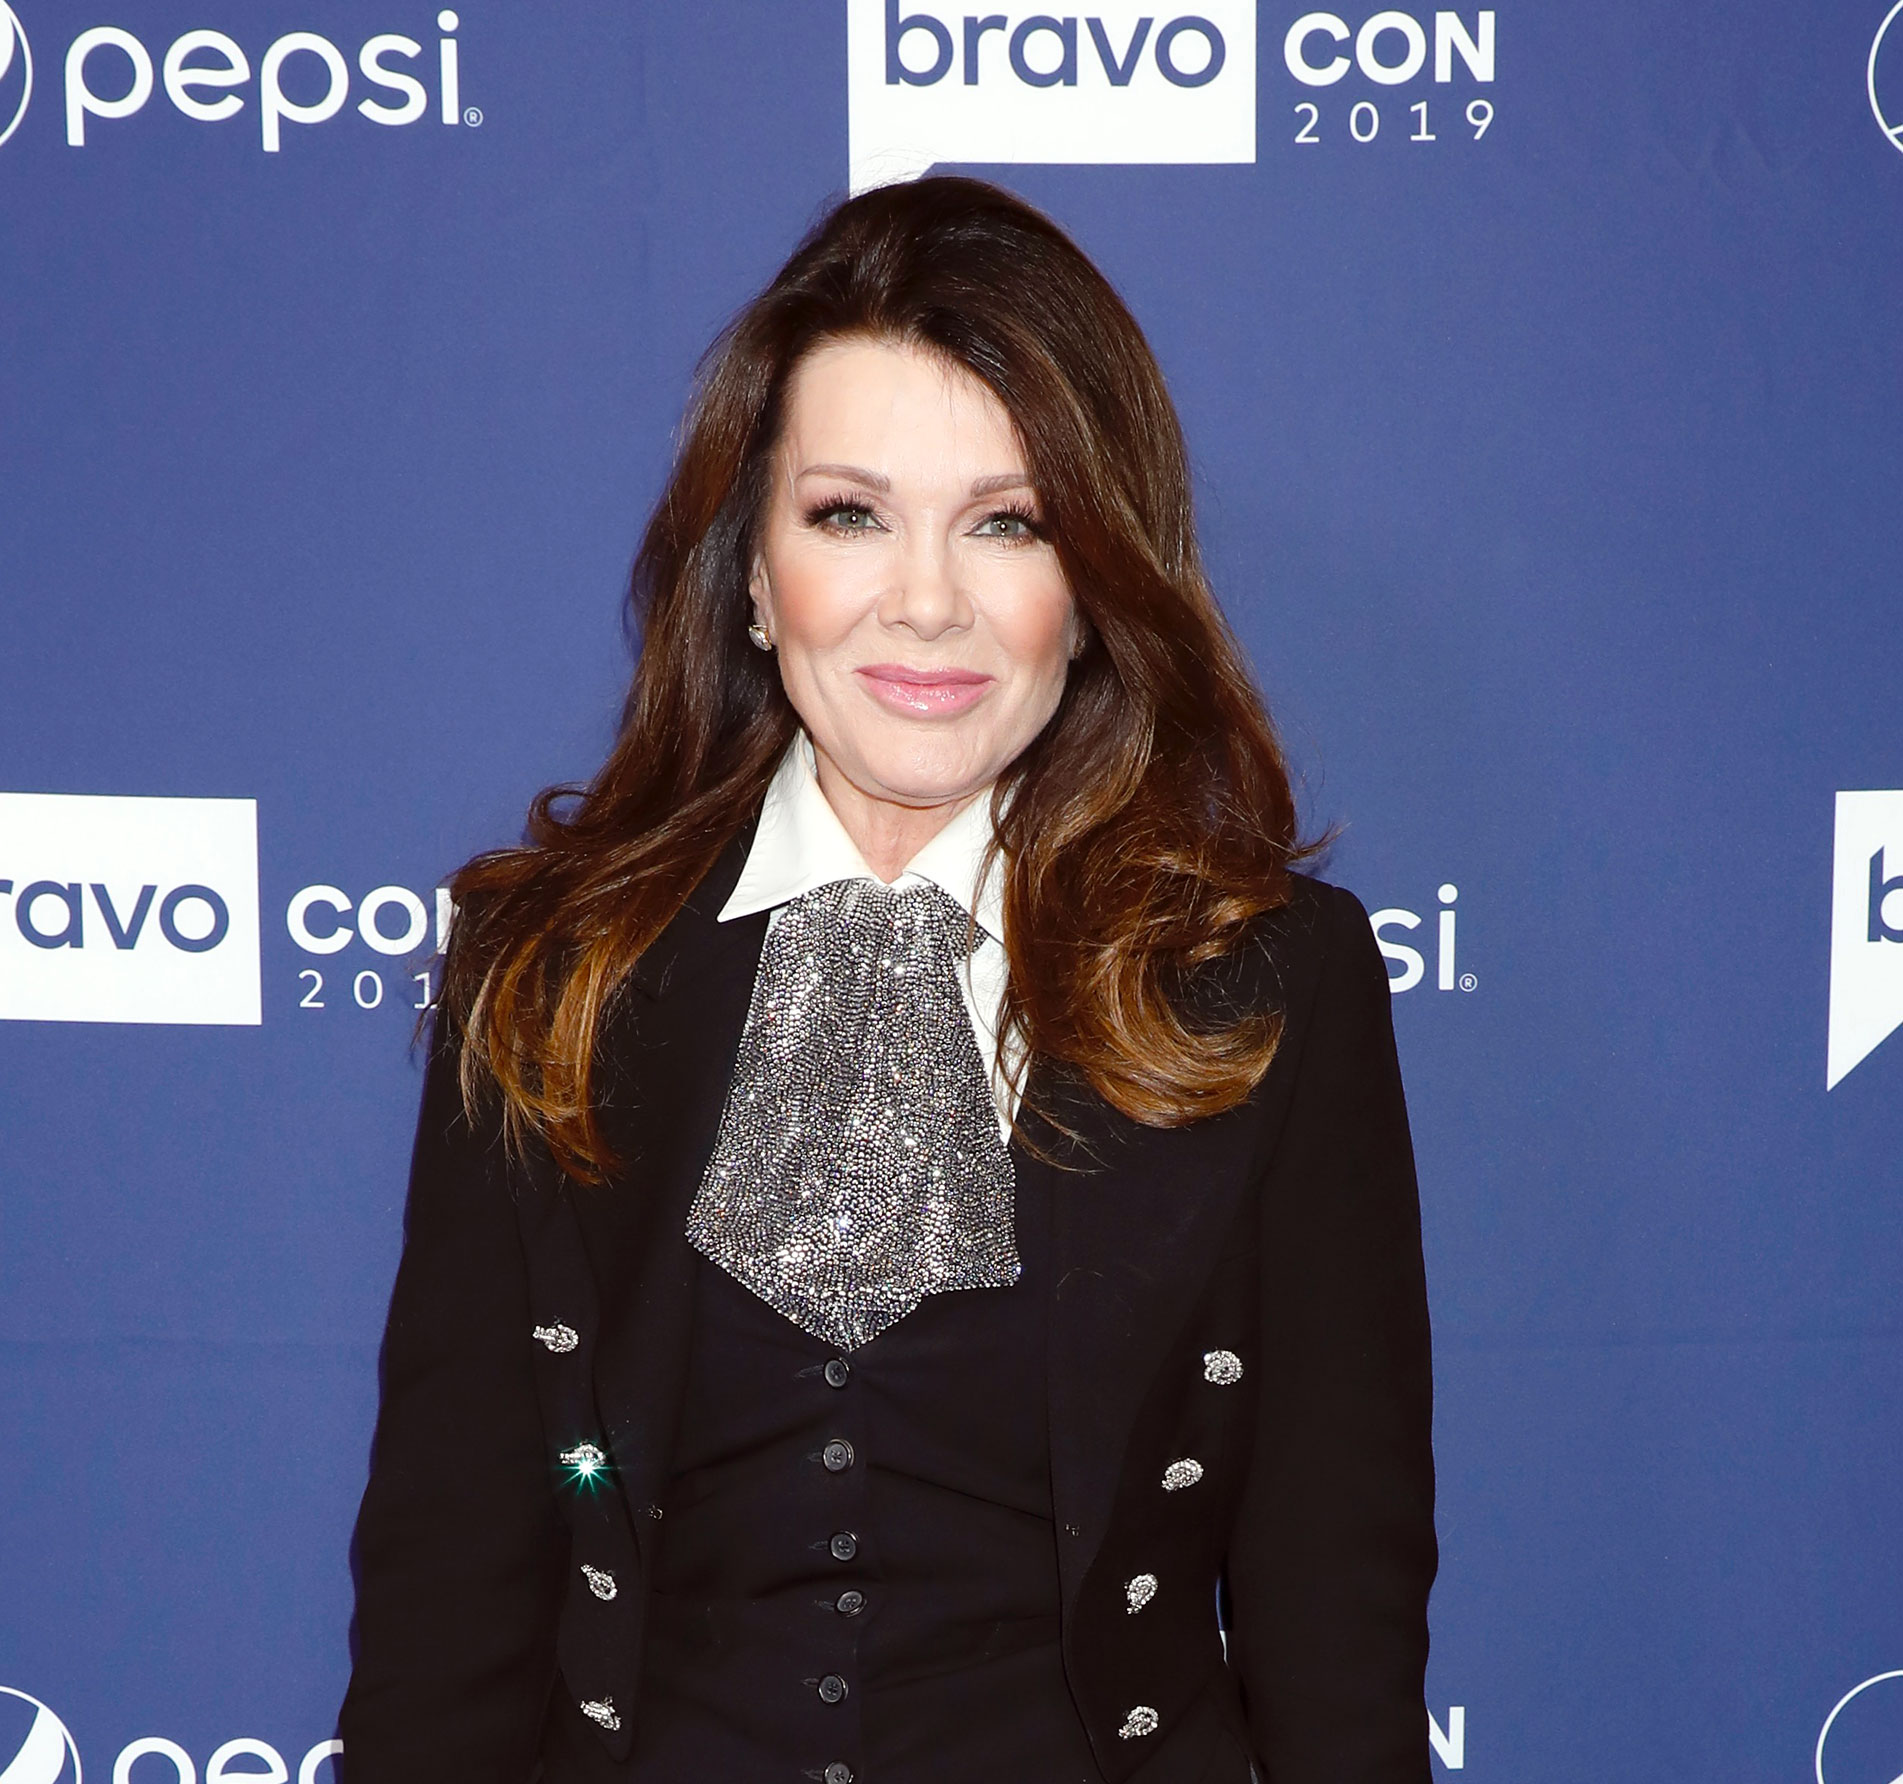 Lisa Vanderpump Ready to Leave 'Housewives' But One Thing Stopping Her